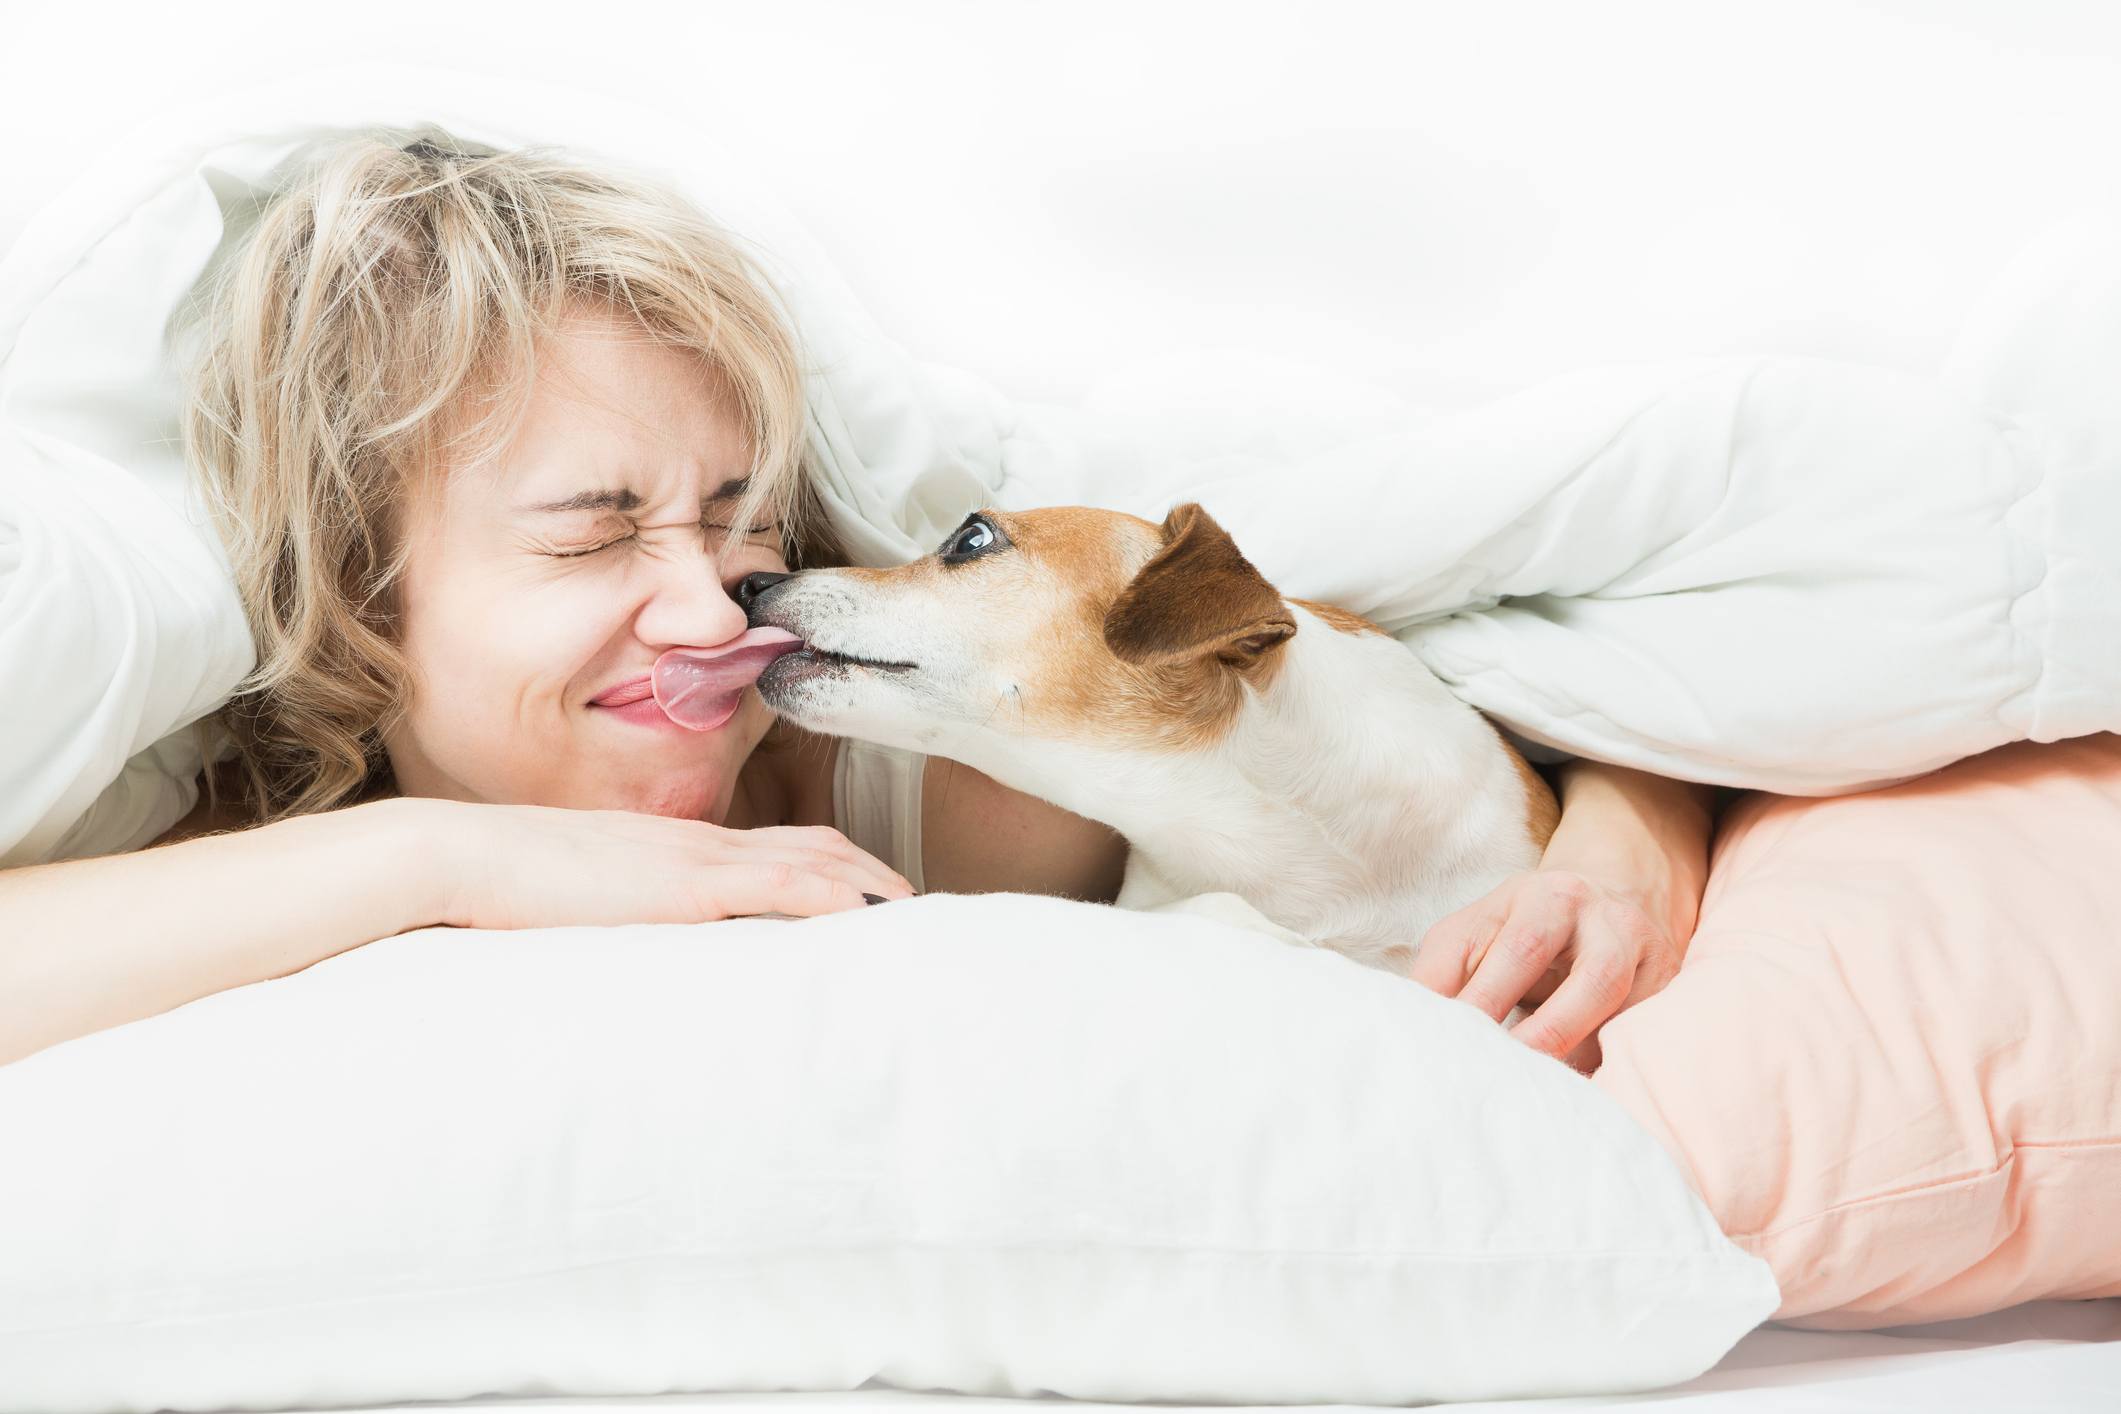 a dog licks a woman's face in a bed